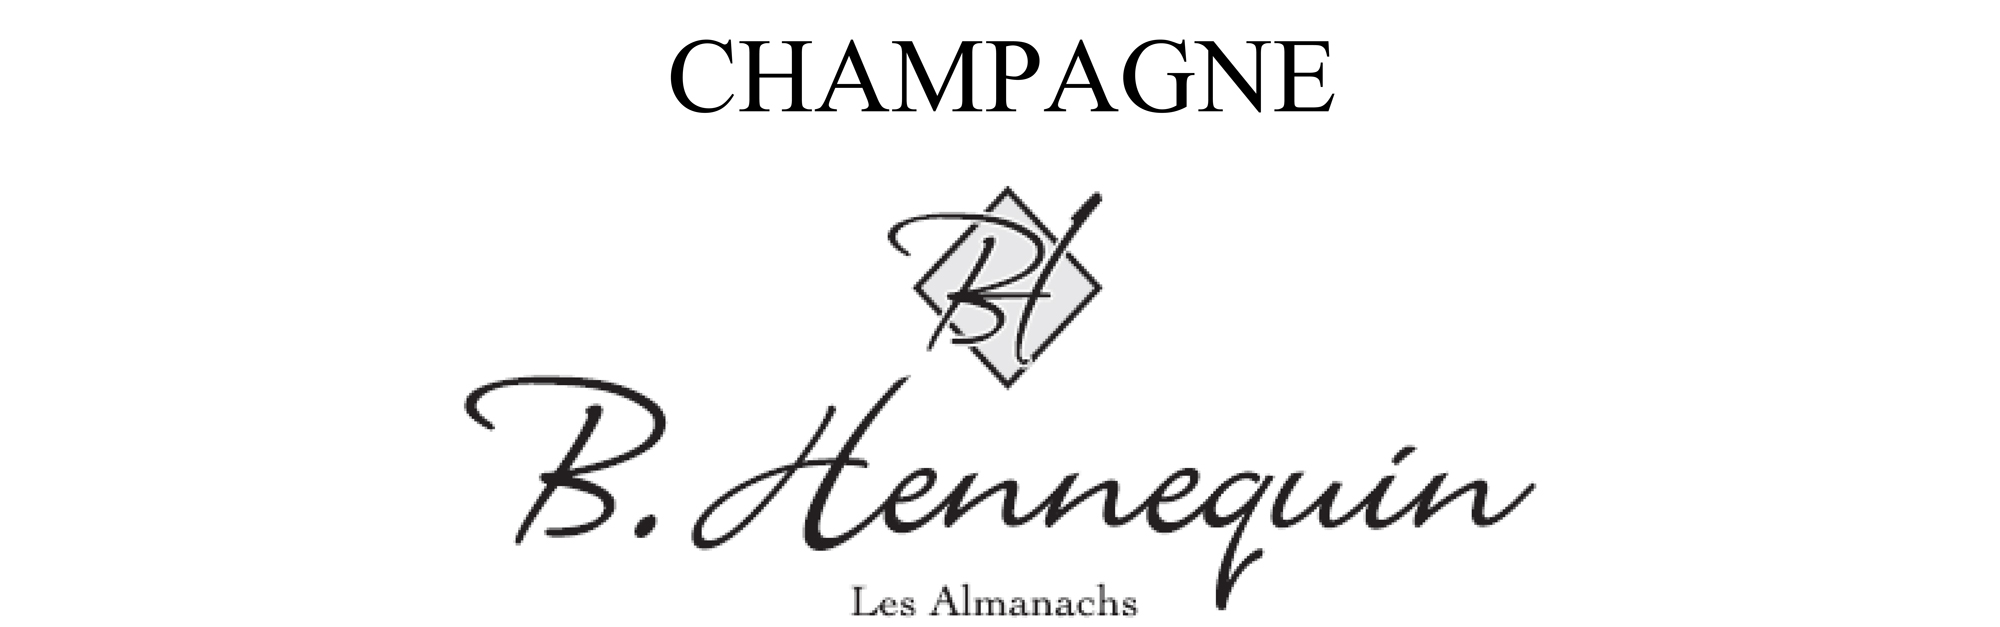 Champagne B. Hennequin